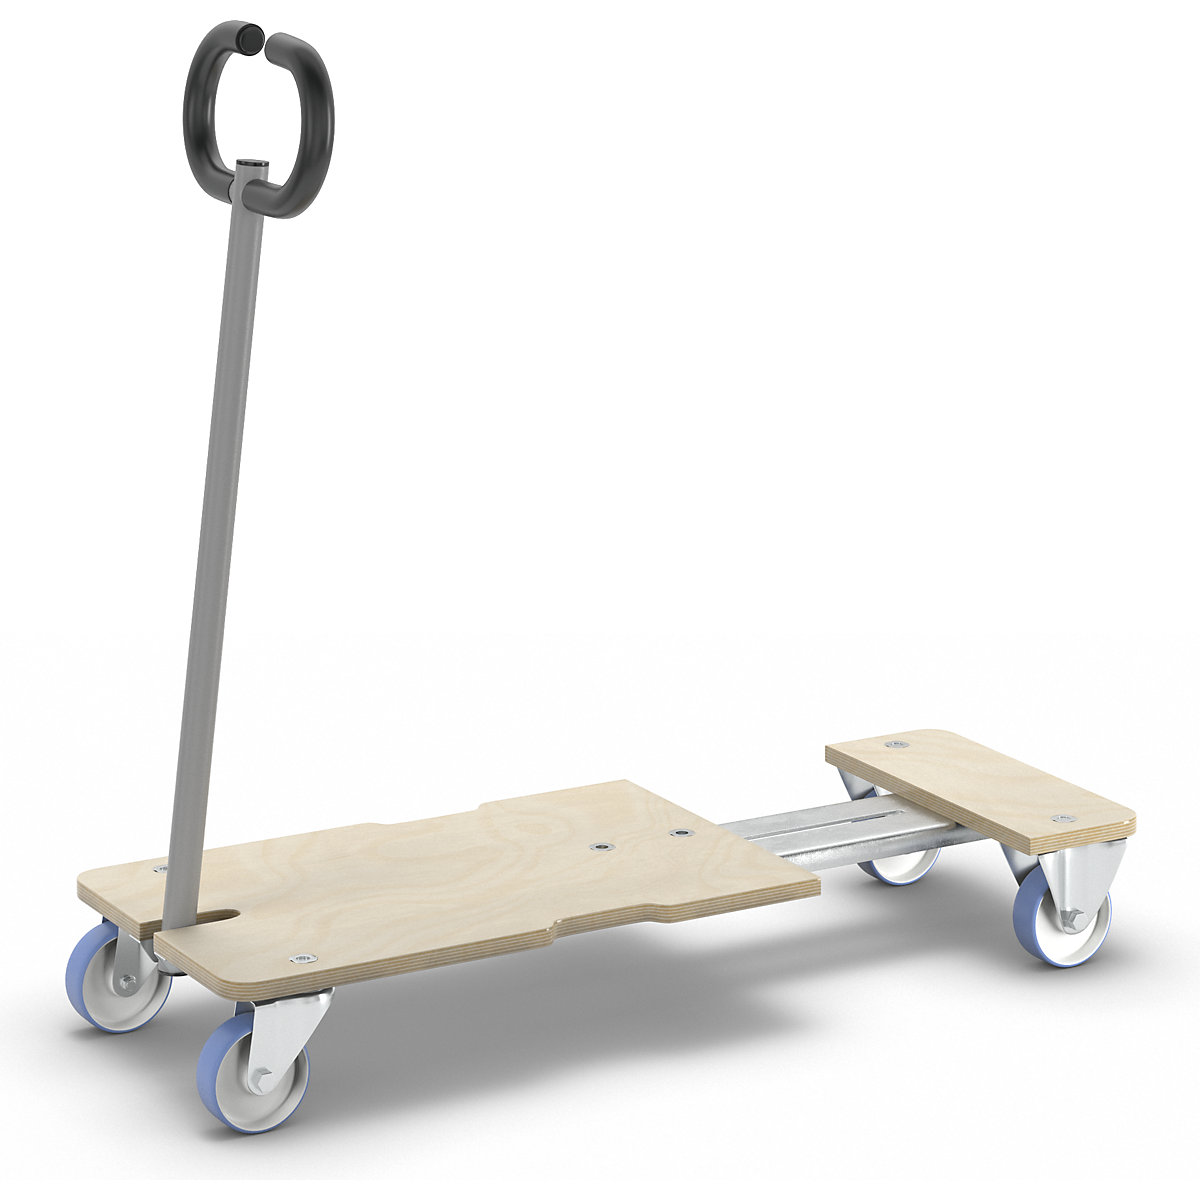 STAR CARRIER EXTENDABLE transport dolly – Wagner